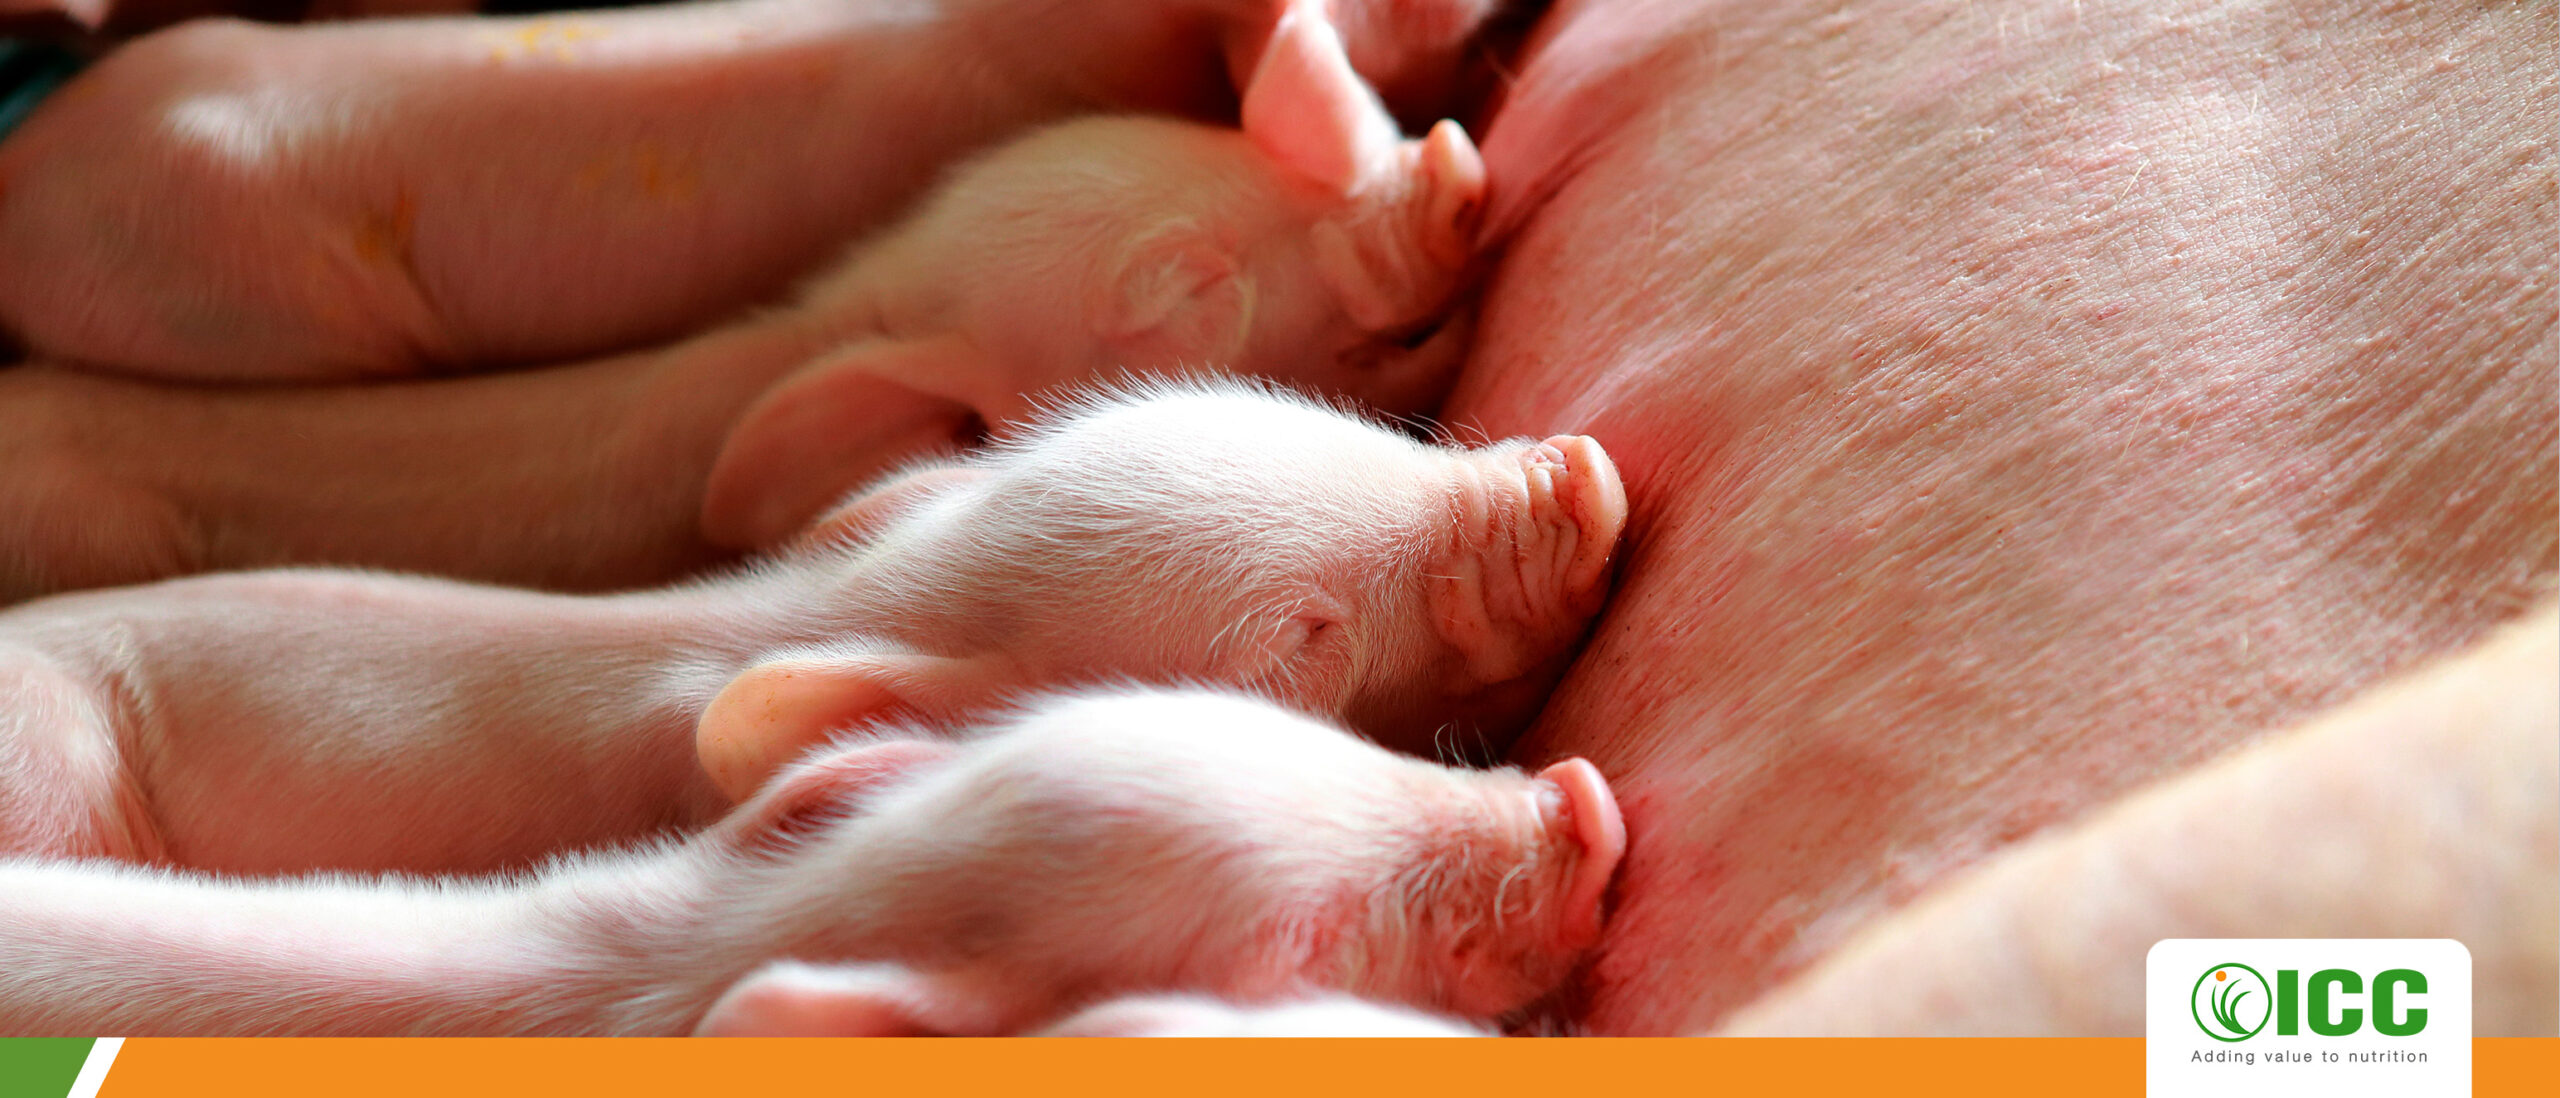 Immunonutrition ensures stress-free weaning and supports better immune response in piglets